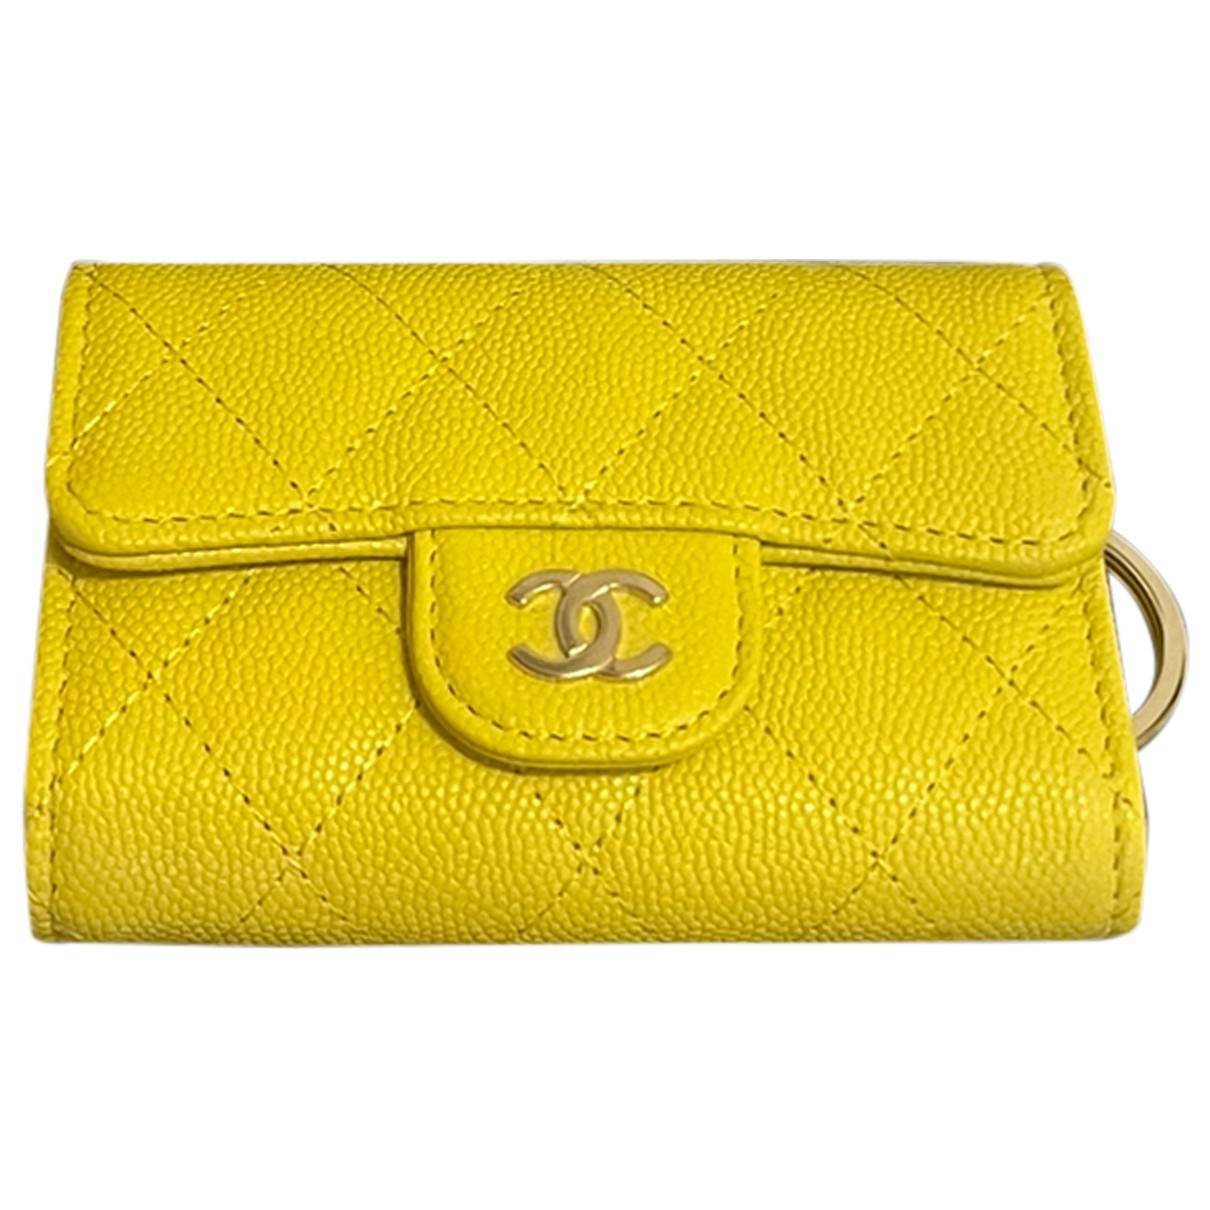 CHANEL WALLET REVIEW. CHANEL CARD HOLDER REVIEW. CHANEL SLG 